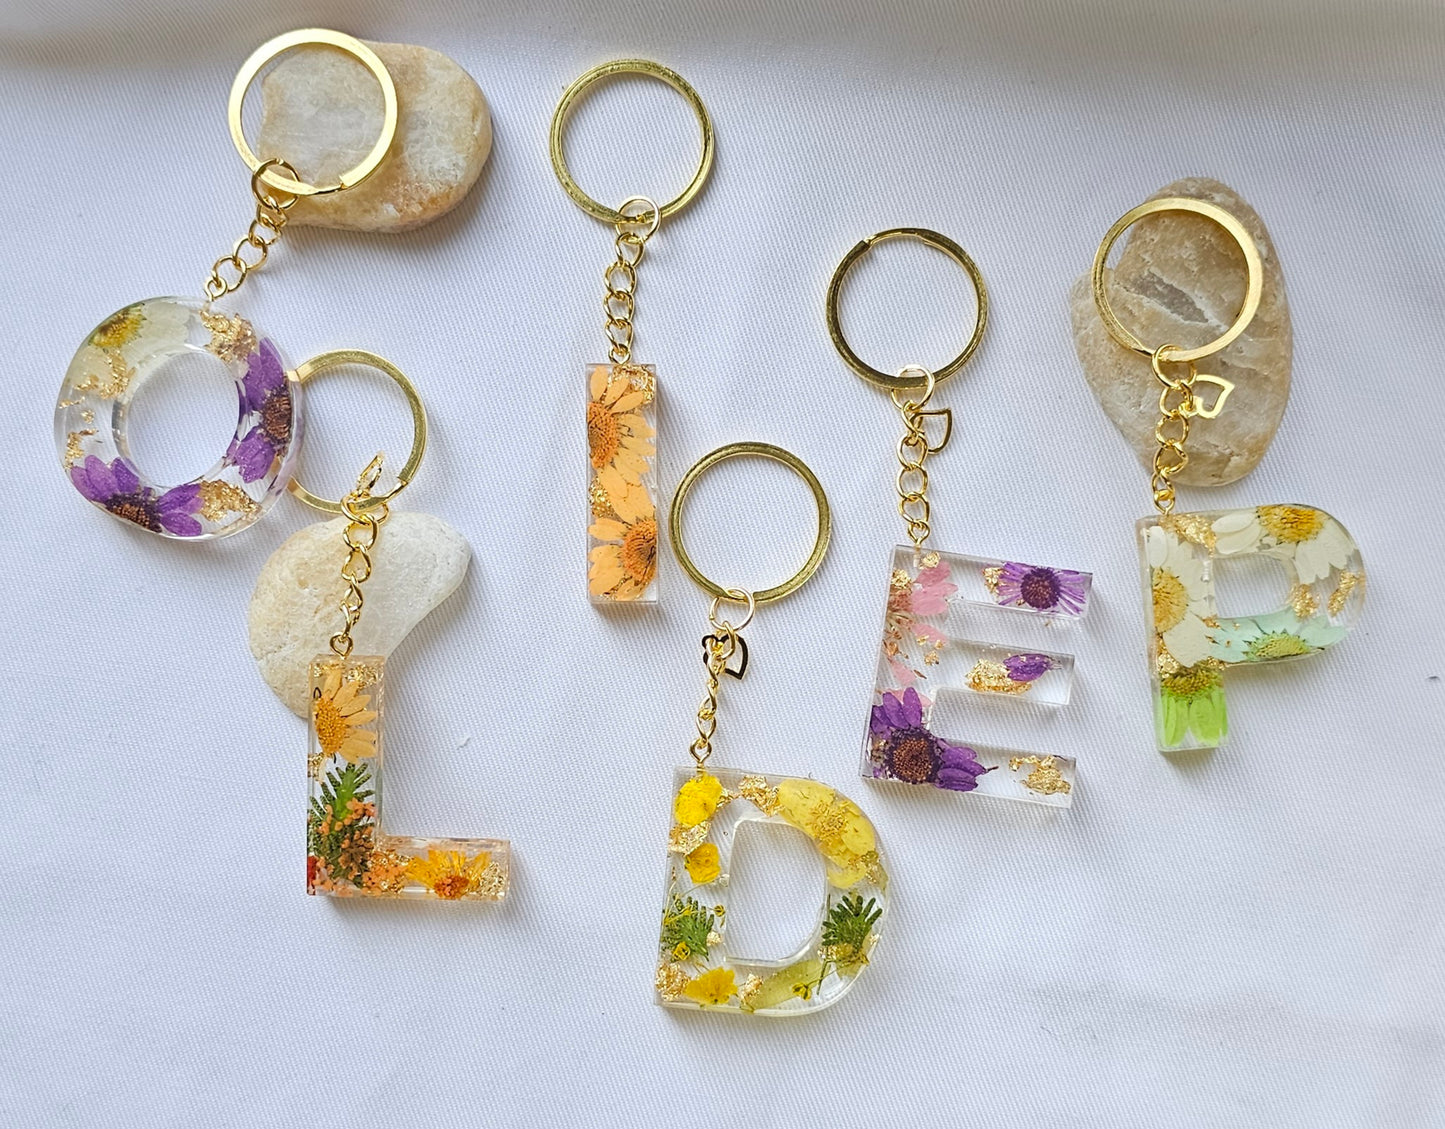 Floral Letter Keychains/ Flower keychains